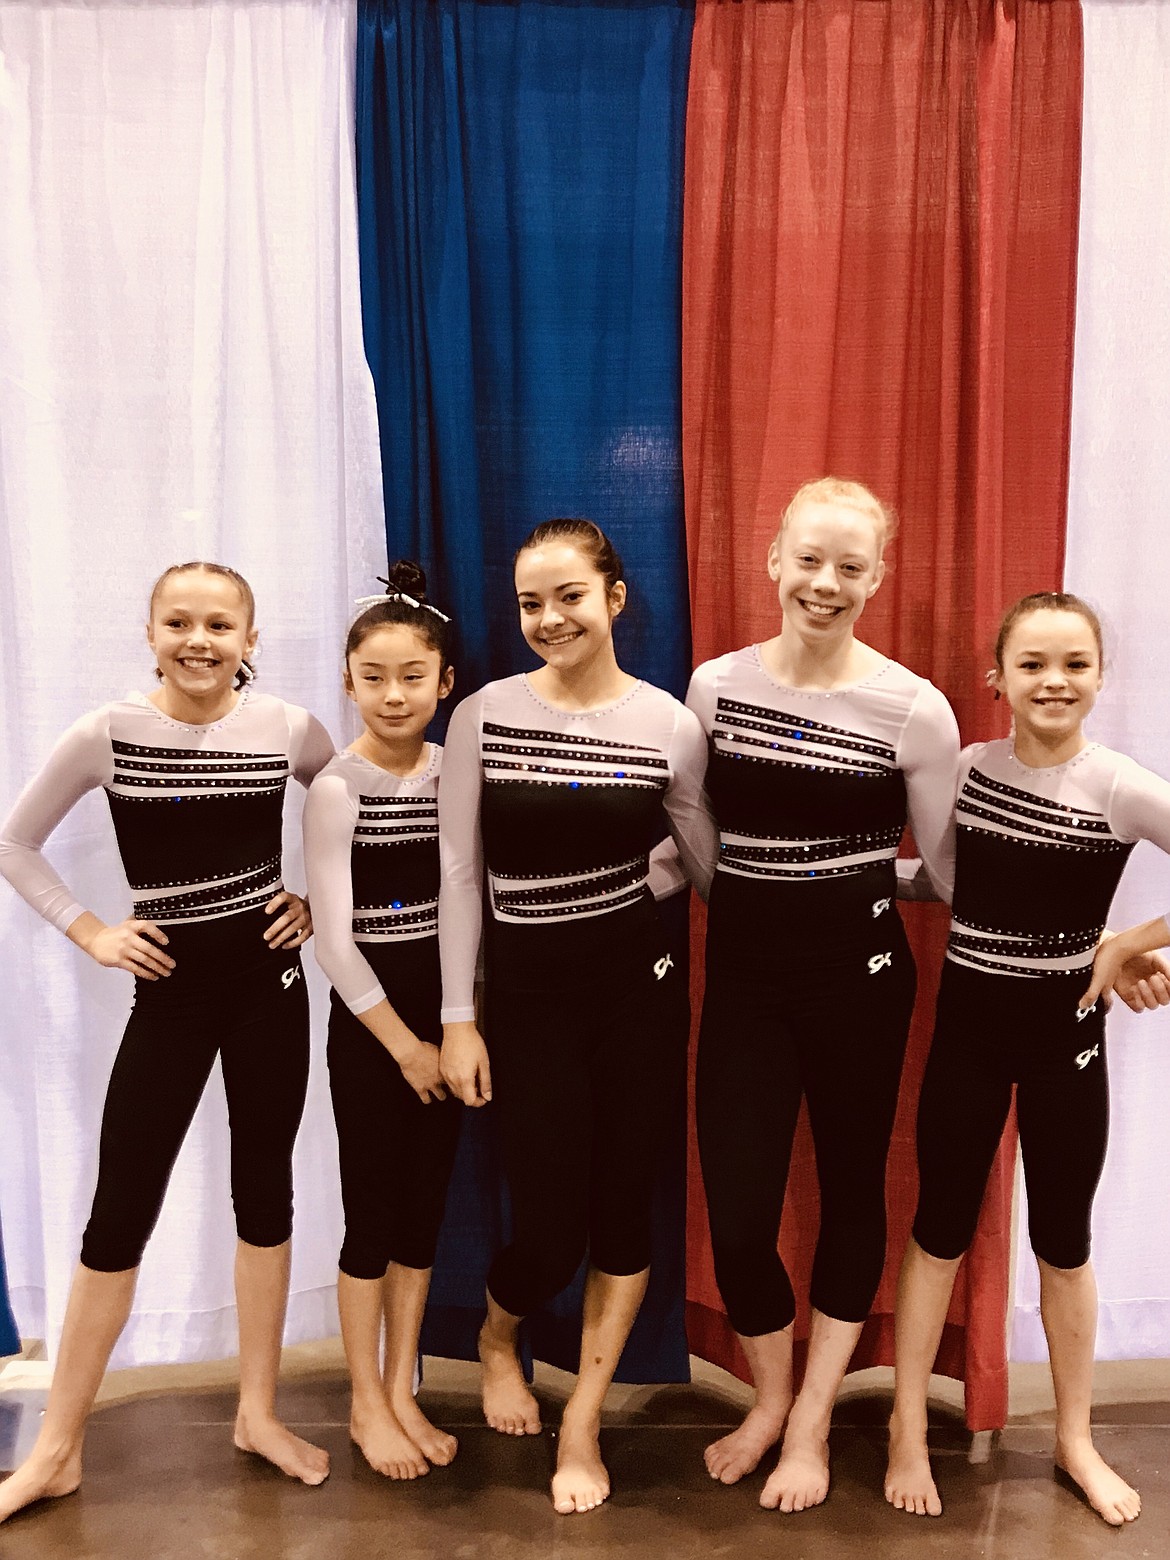 Courtesy photo
Team Avant Coeur Gymnastics Level 7s at the Magical Classic in Florida. From left are Madalyn McCormick, Maiya Terry, Elizabeth Cook, Emma Childs and Danica McCormick.